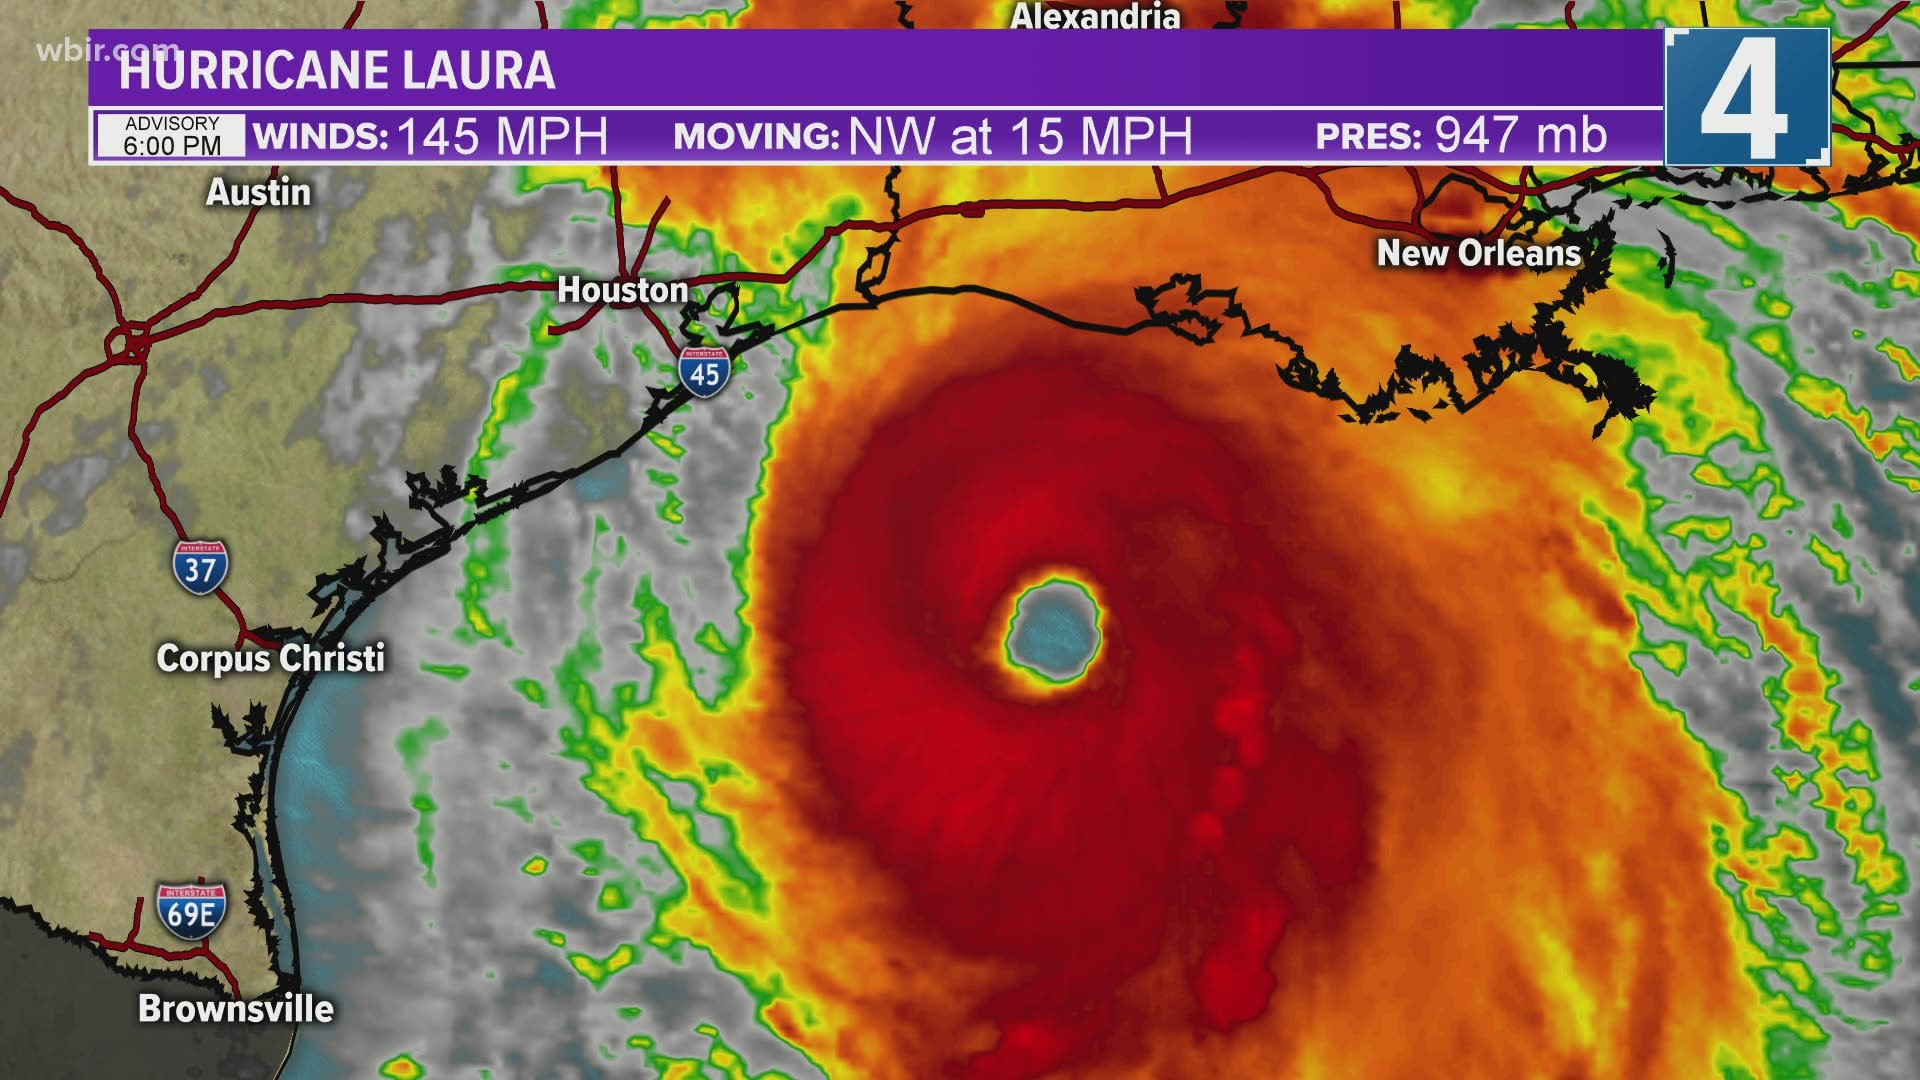 Hurricane Laura is now a category 4 storm, and our weather team is tracking it.